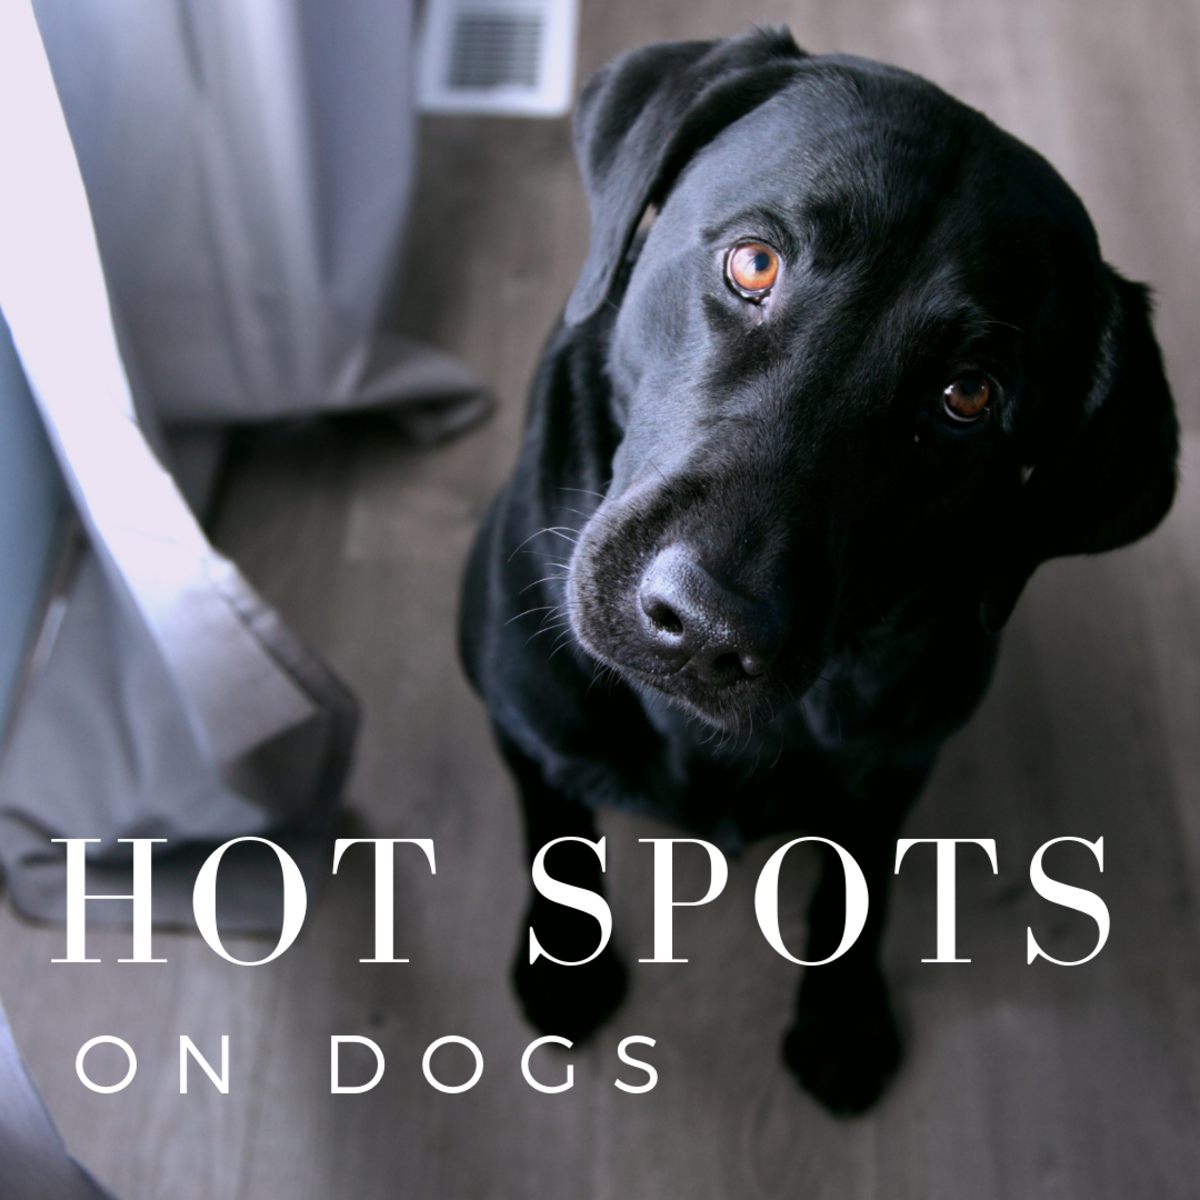 What's a hot spot on a dog, and what are the causes?